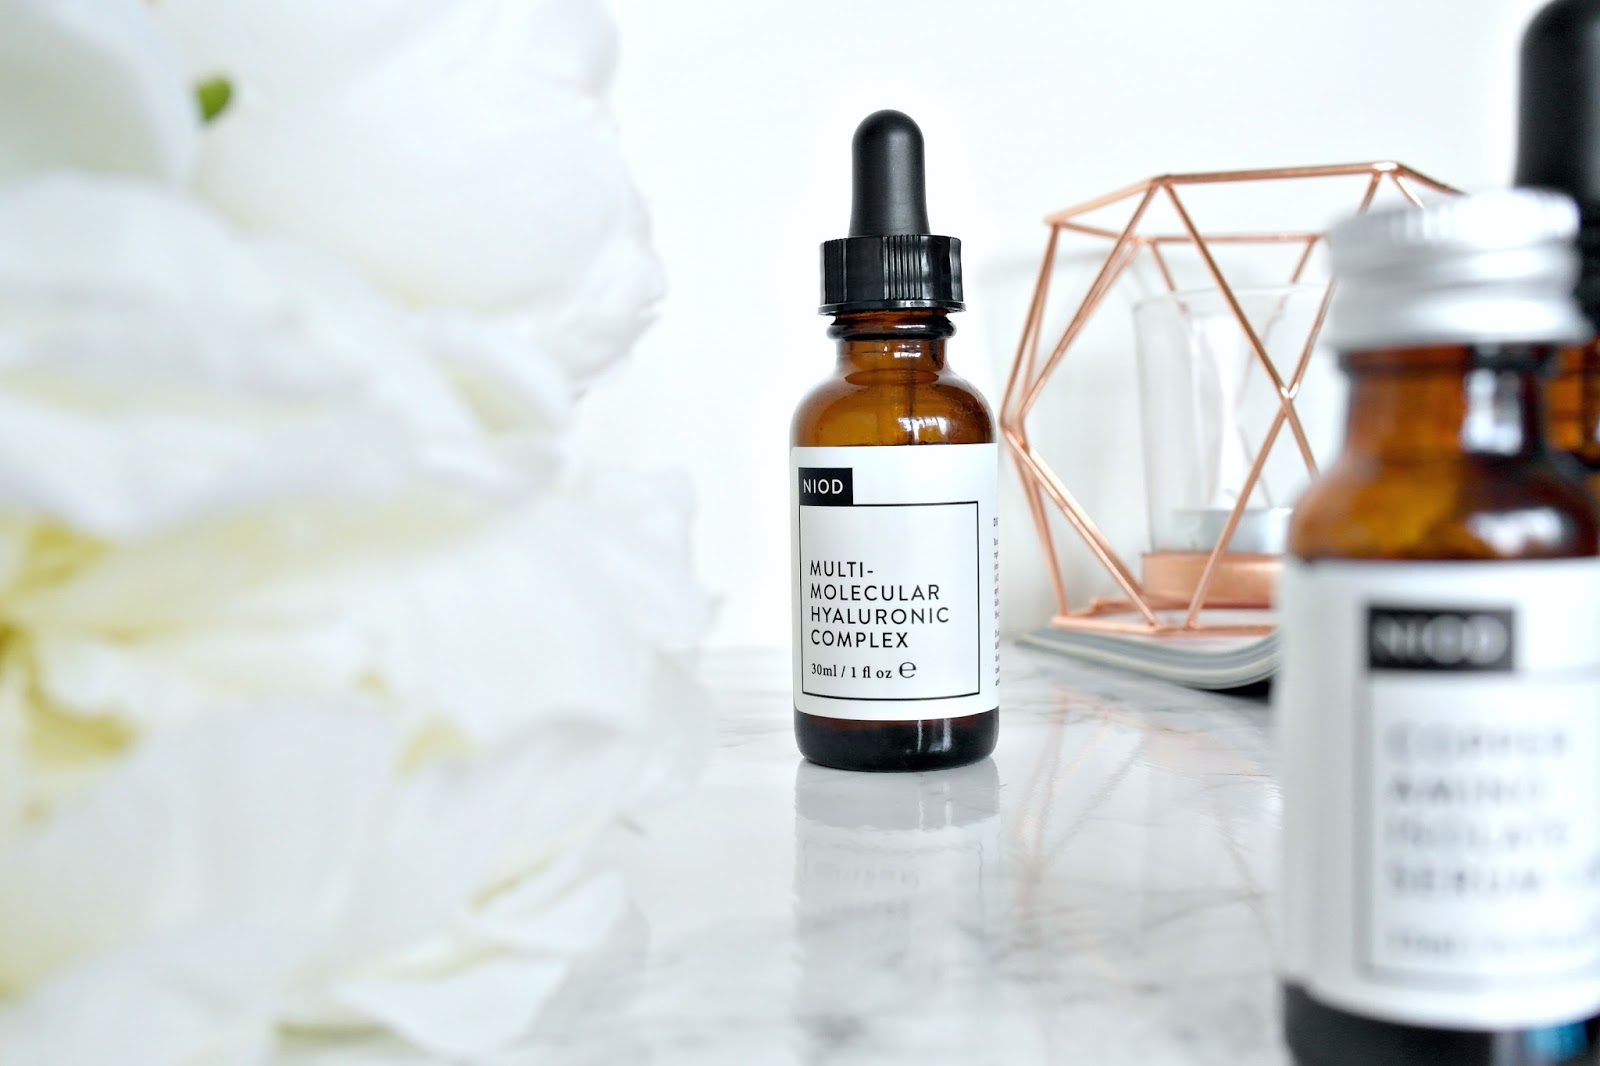 Niod Multi-molecular hyaluronic complex, review, beauty blogger